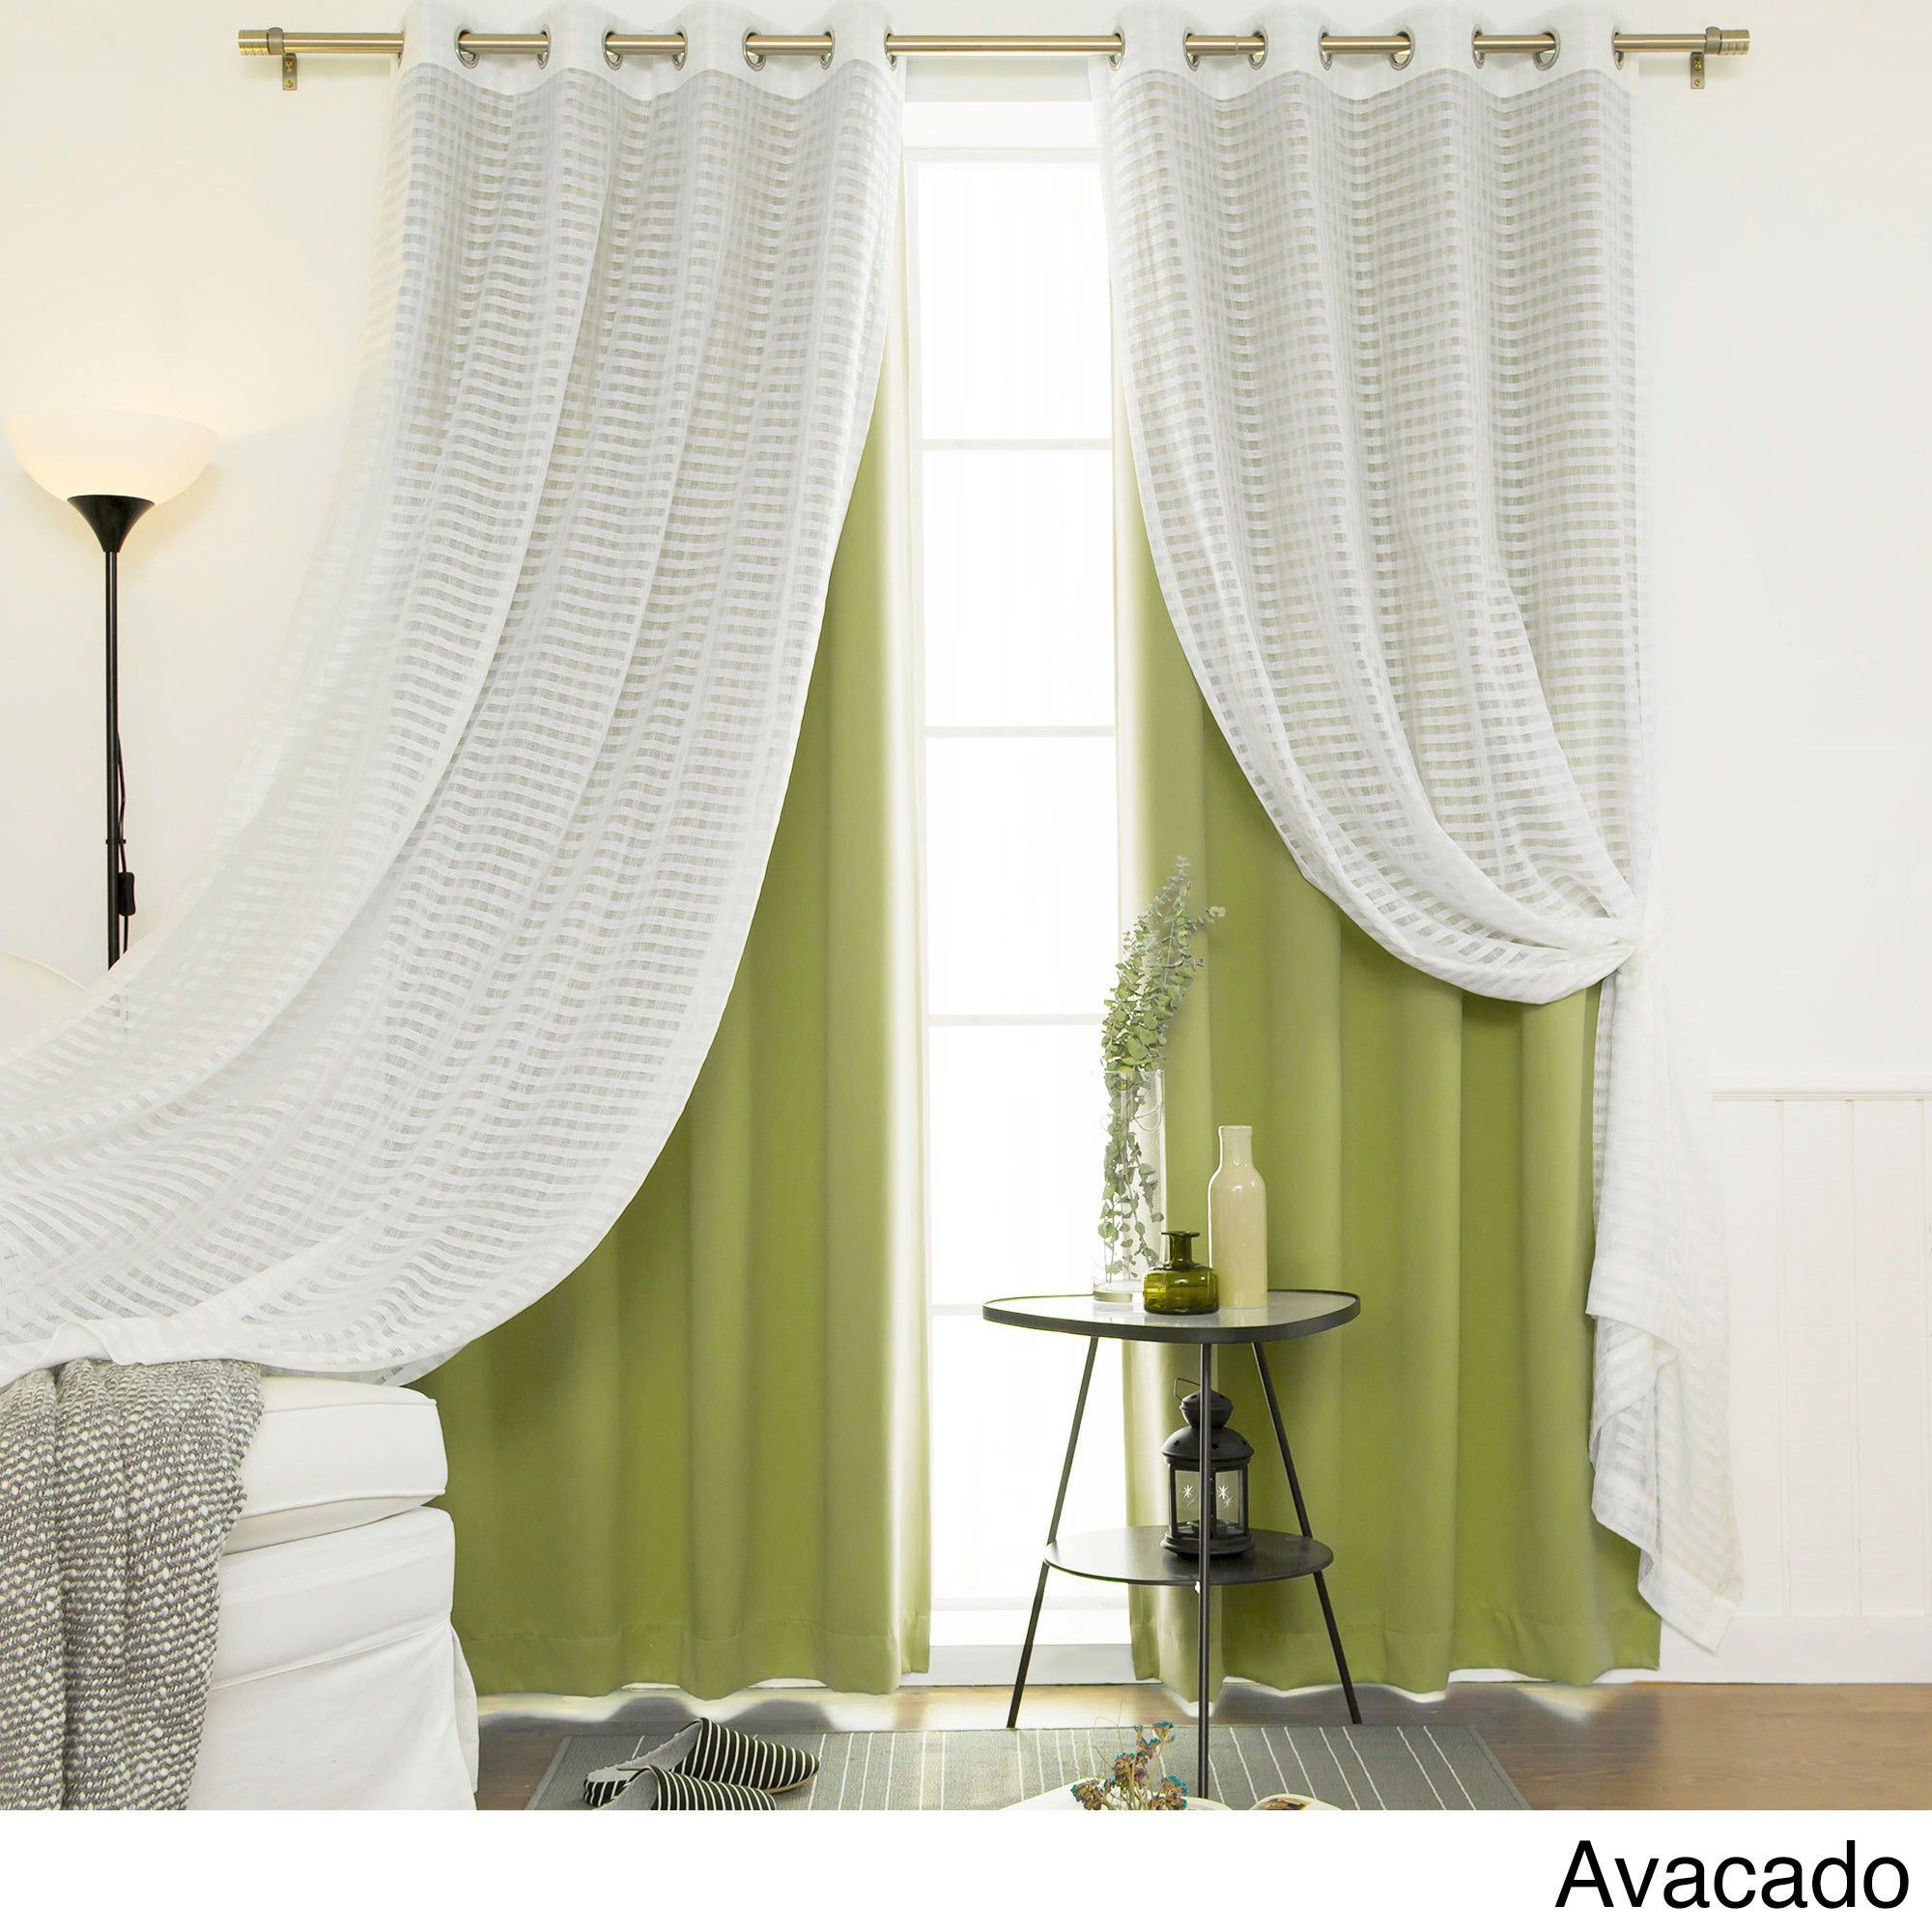 Aurora Home Mix & Match Blackout And Check Sheer 4 Piece Curtain Panel Set  – 52"w X 84"l Throughout Bethany Sheer Overlay Blackout Window Curtains (View 10 of 20)